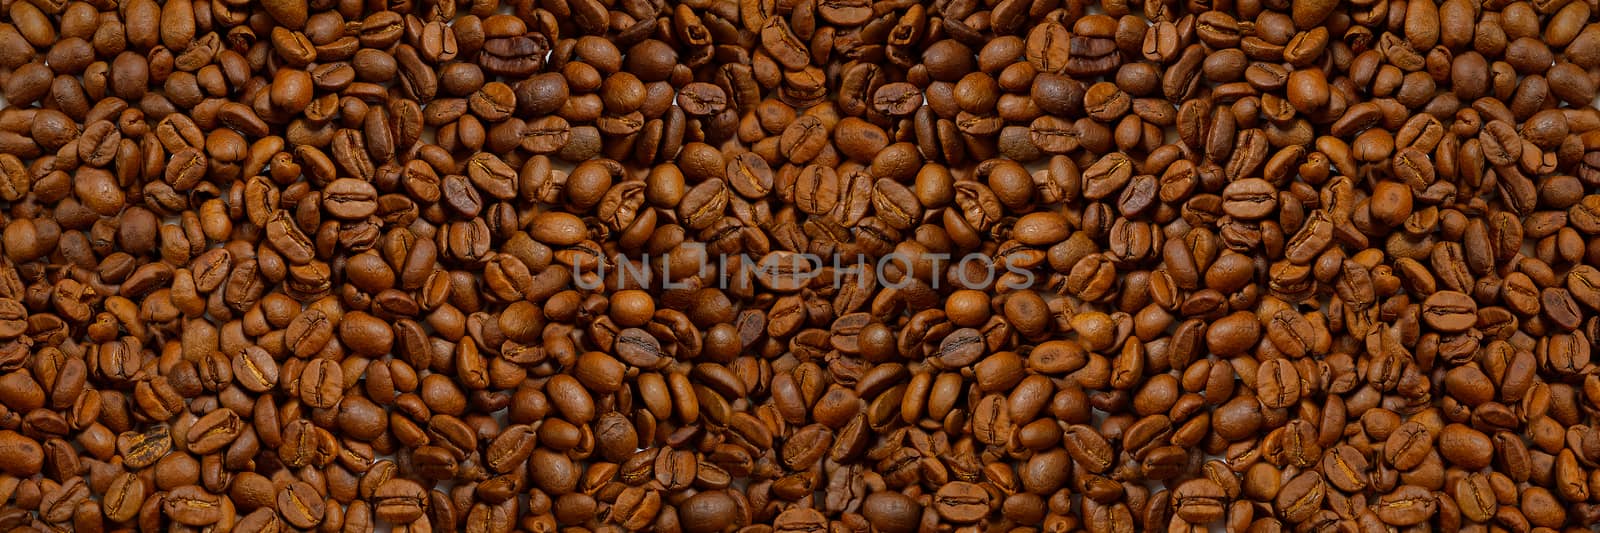 Roasted coffee beans banner background. brown coffe beans texture bpanoramic banner